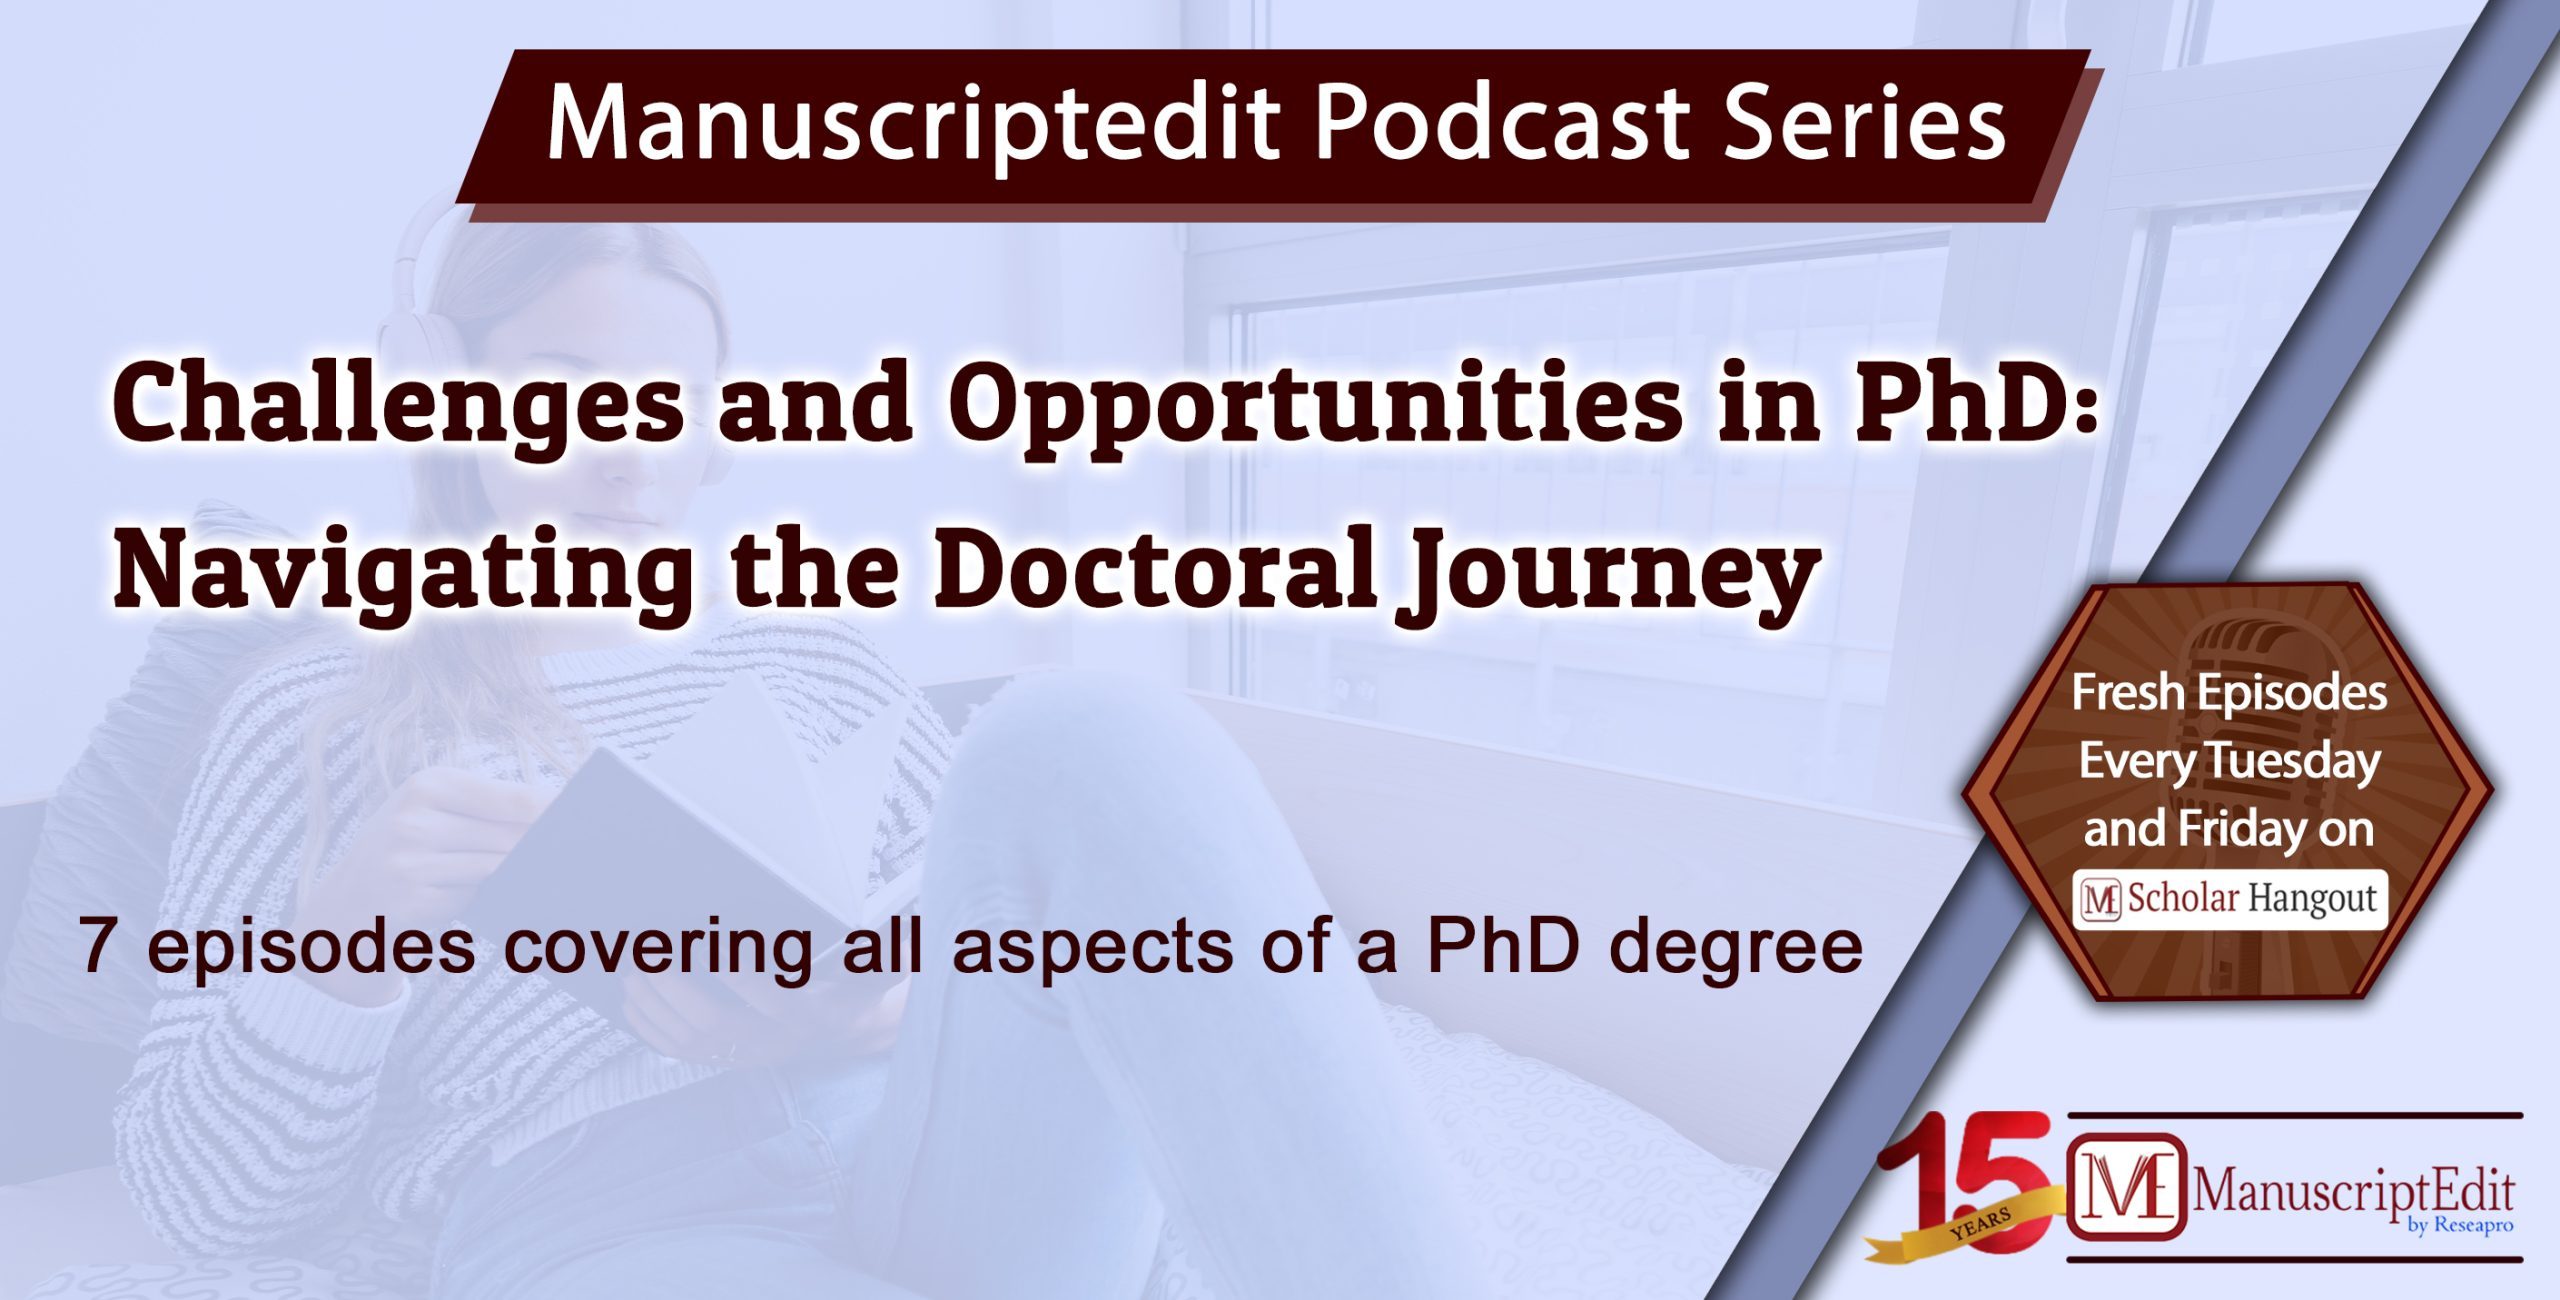 Episode 1: Challenges and Opportunities for PhD students- Embarking on the PhD journey: Deciding study topic and planning ahead